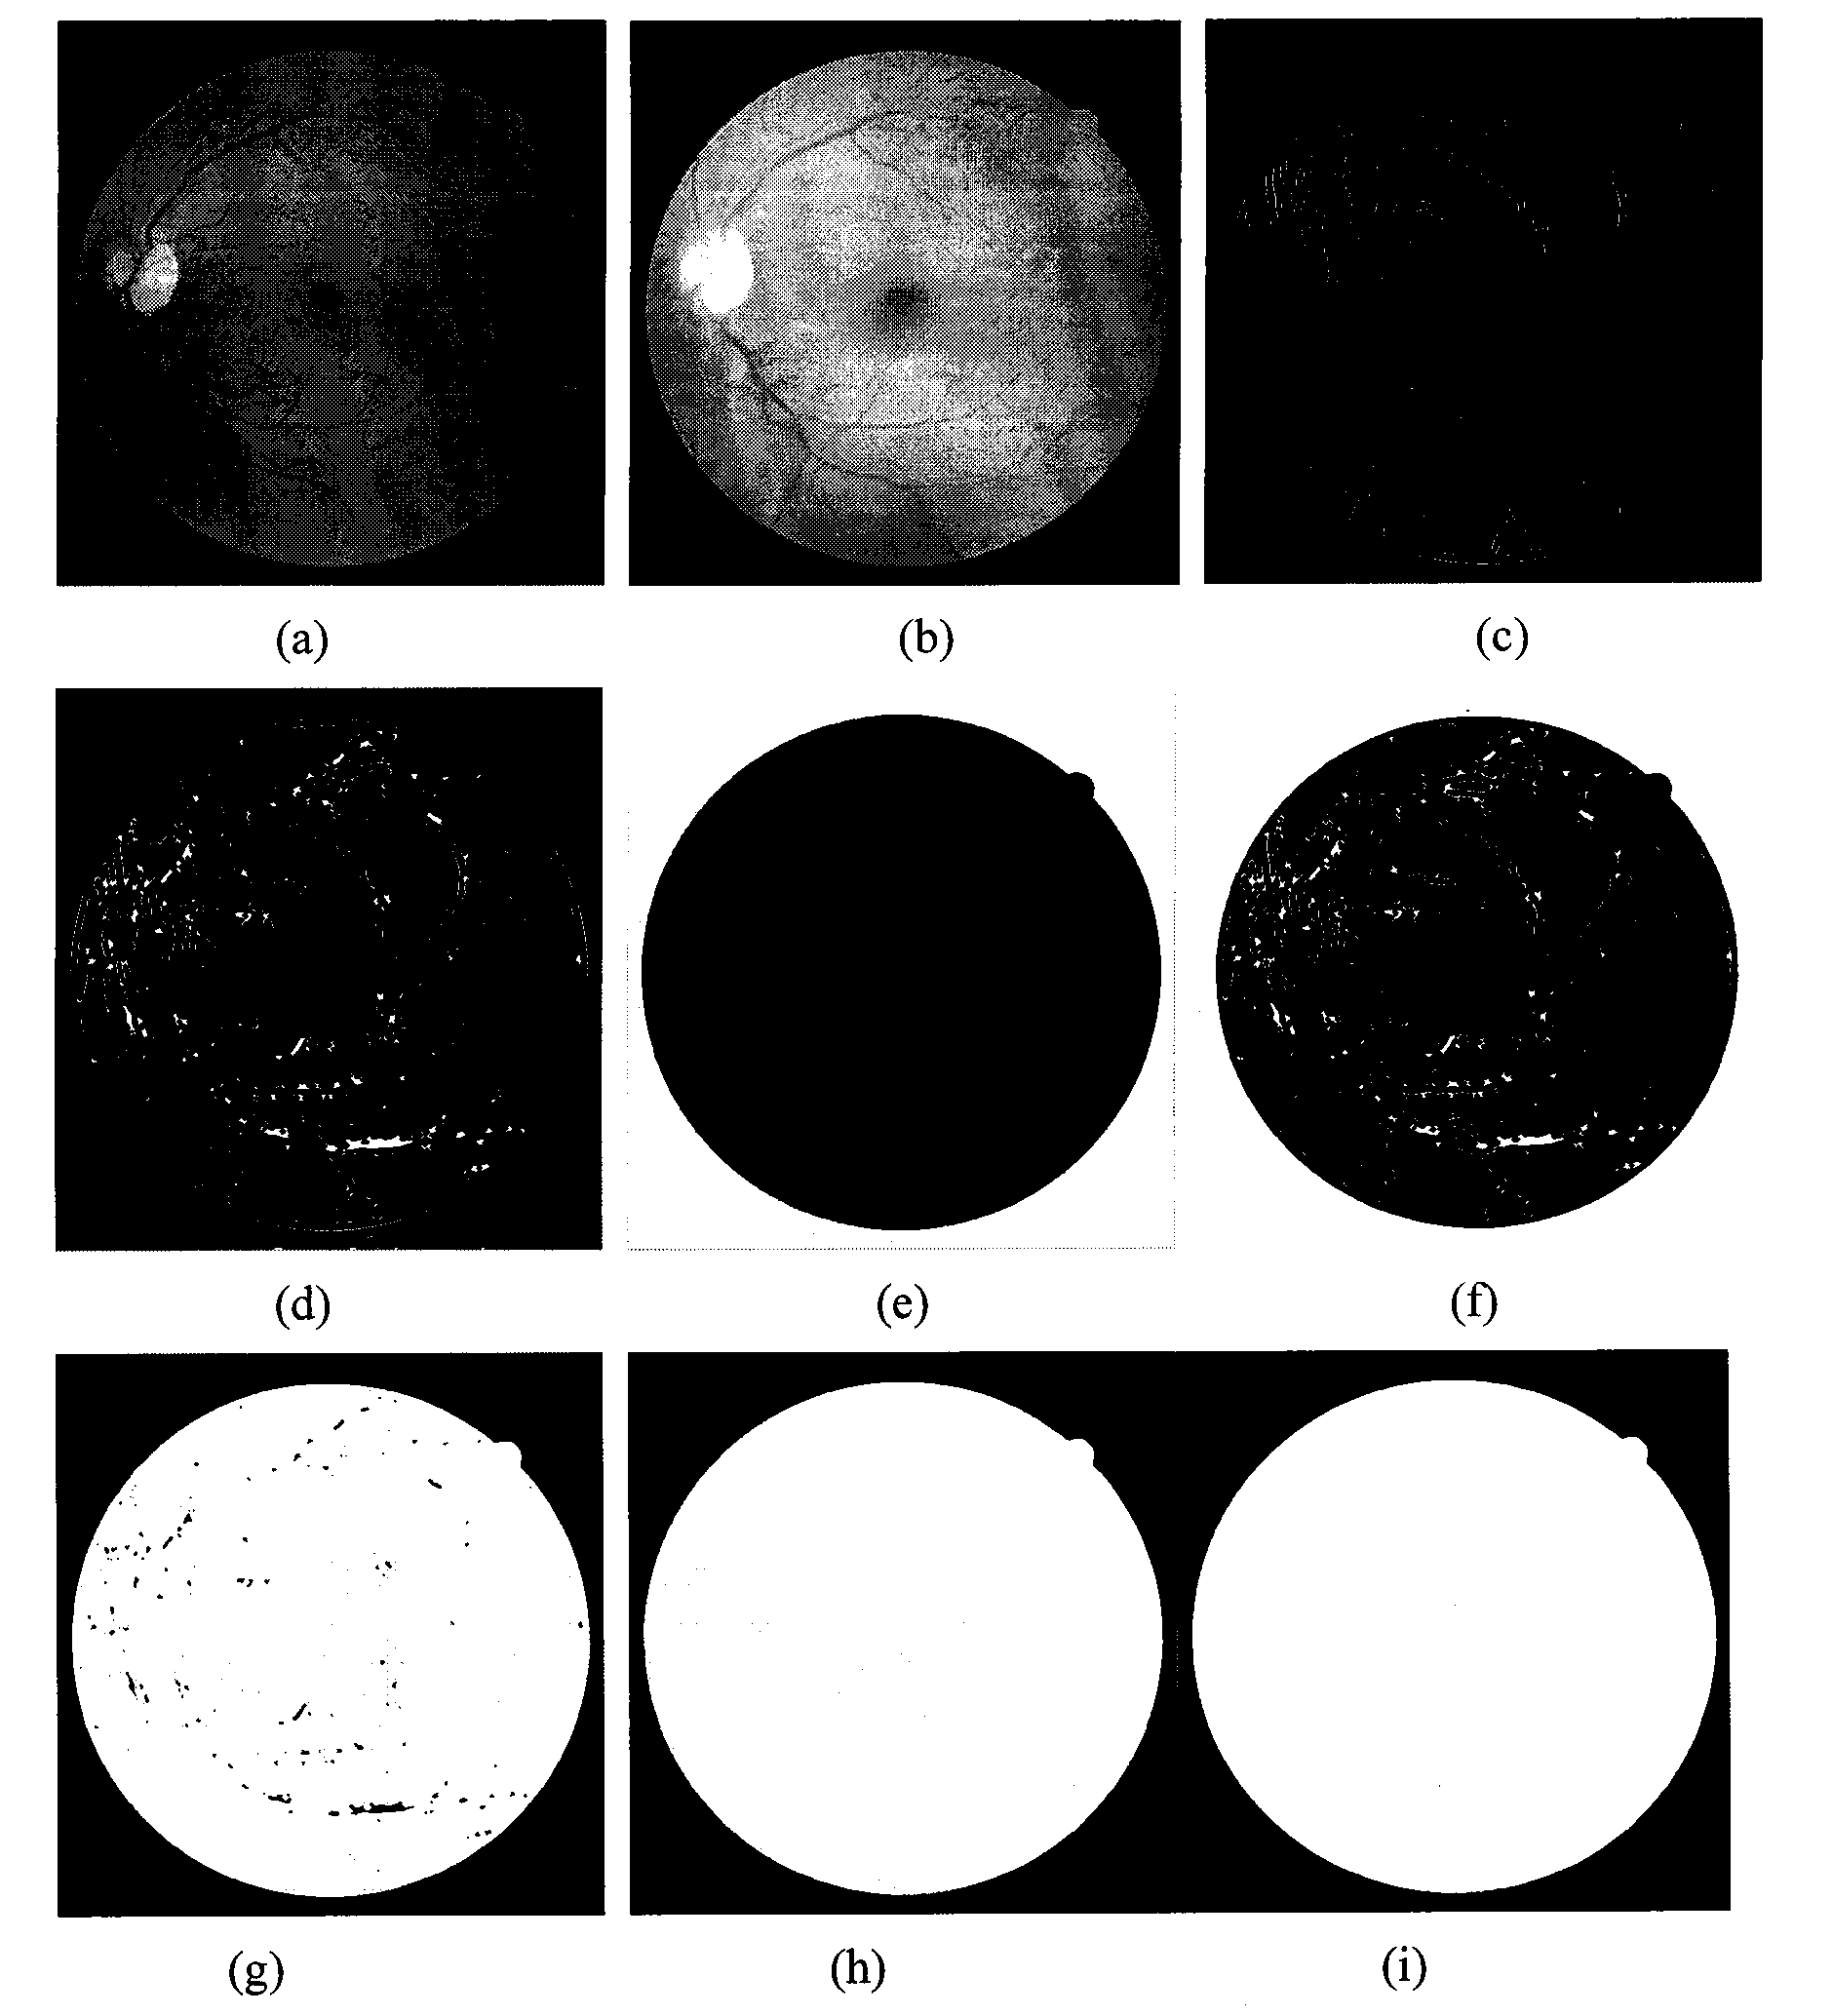 Retinal image segmentation method based on NSCT feature extraction and supervised classification